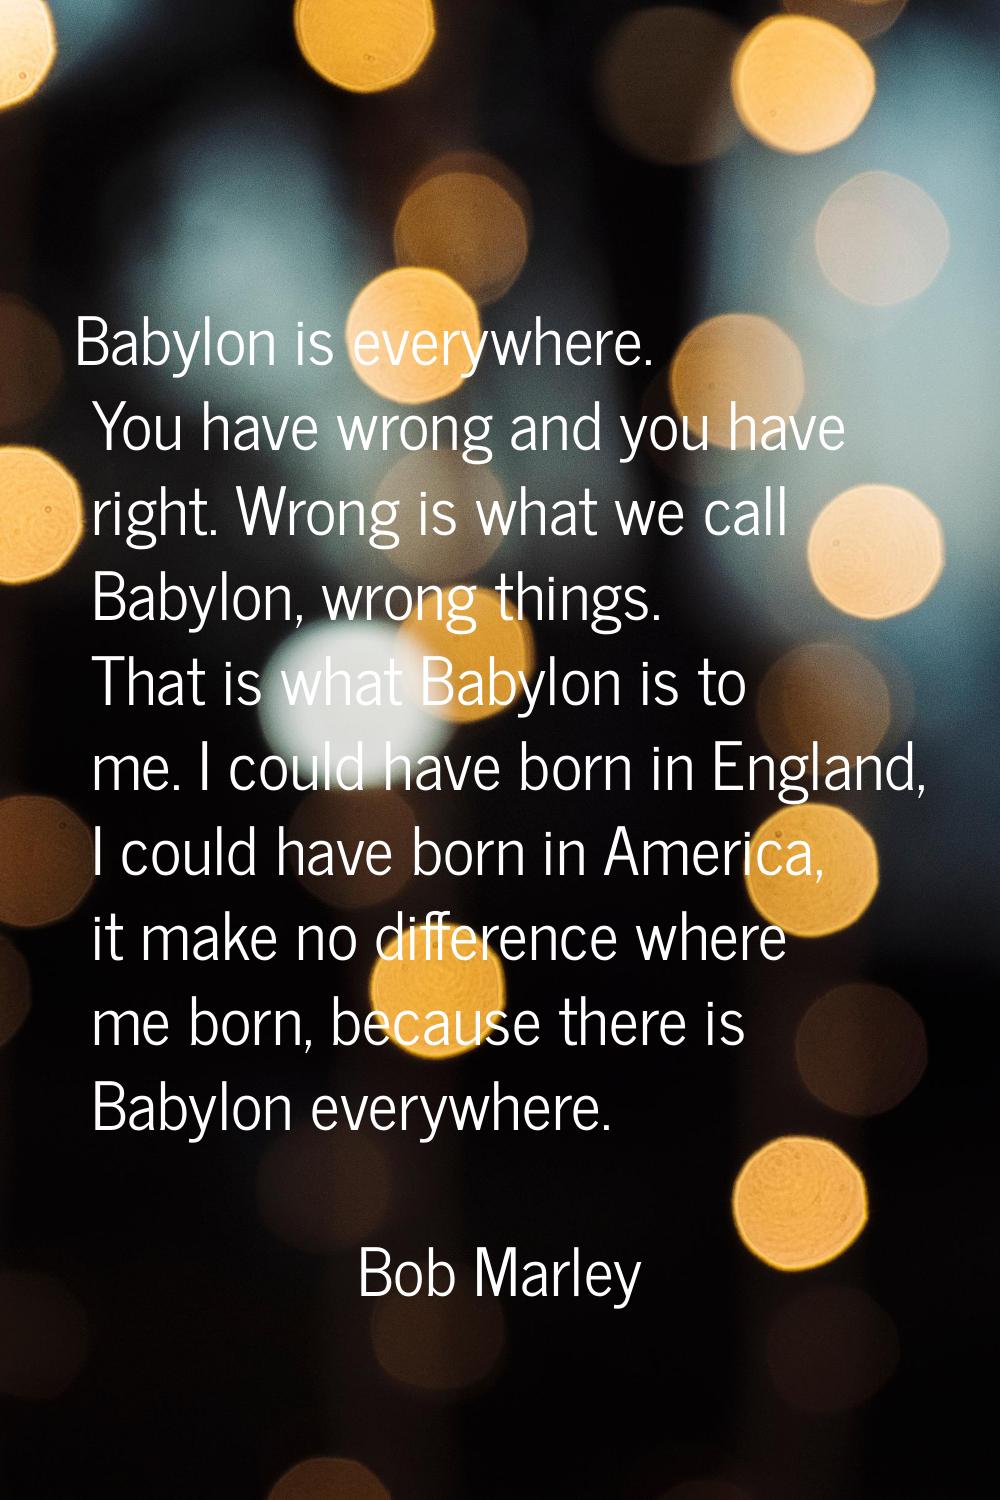 Babylon is everywhere. You have wrong and you have right. Wrong is what we call Babylon, wrong thin